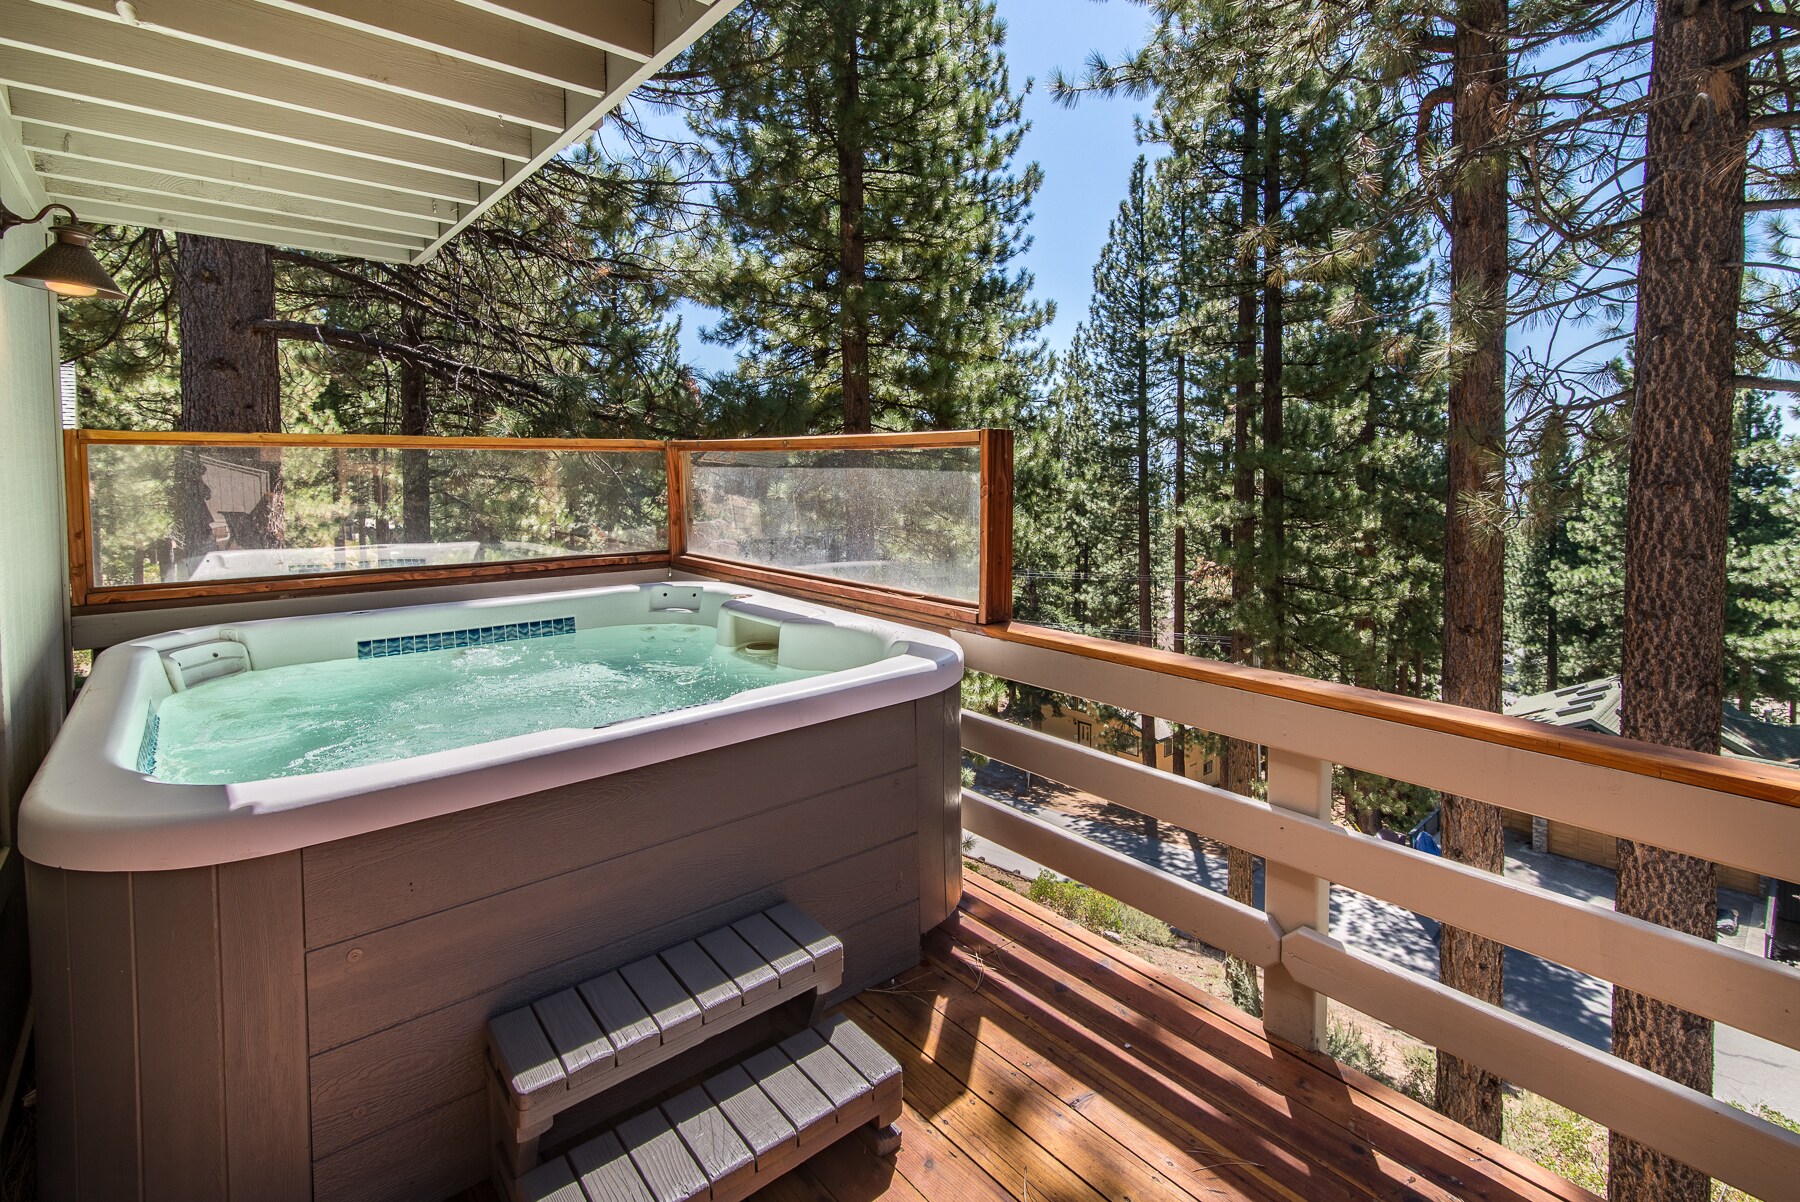 A hot tub on a crisp night among the trees? Yes, please.